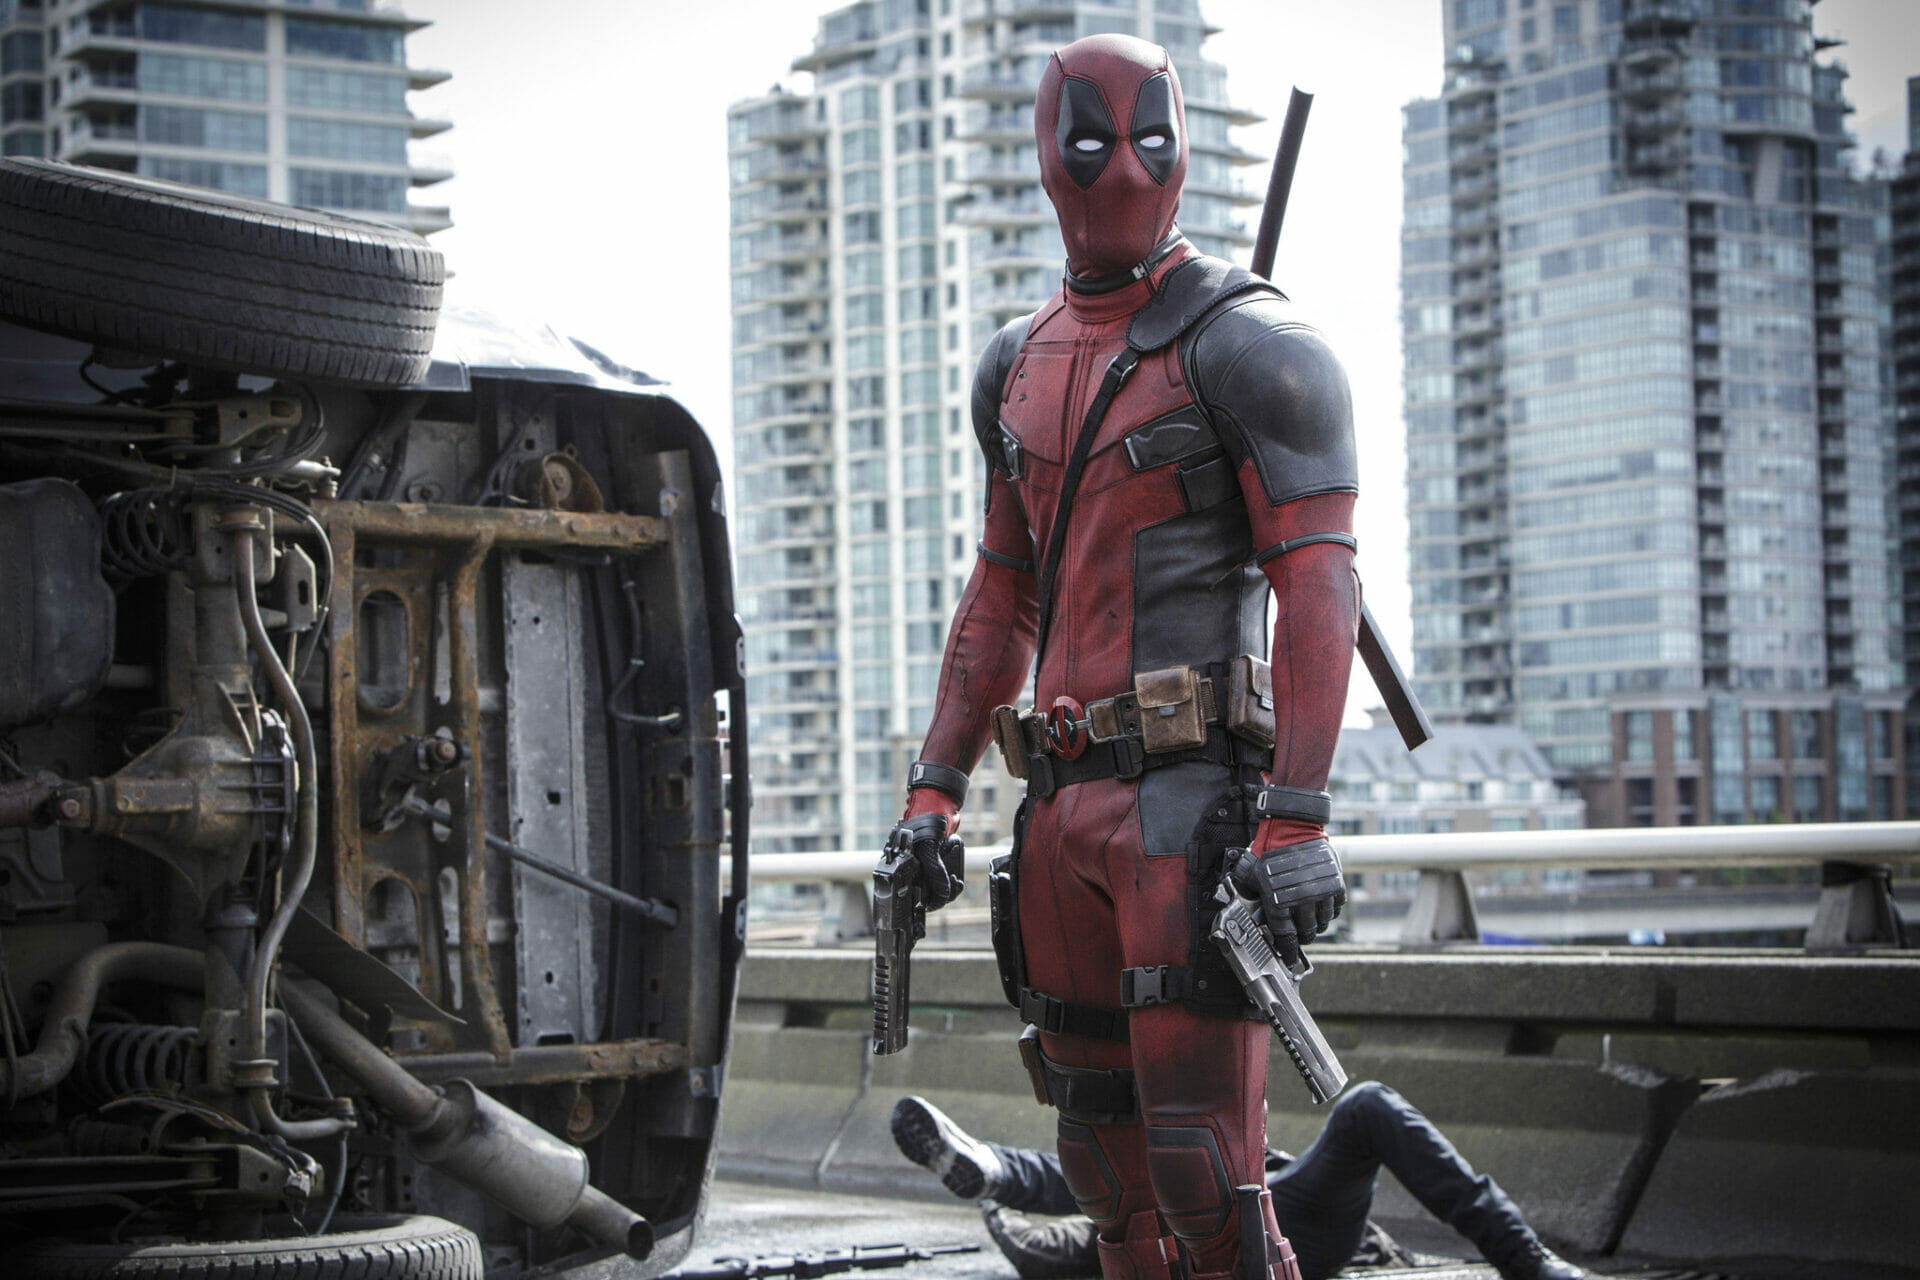 Action comedy movies: Deadpool (2016)